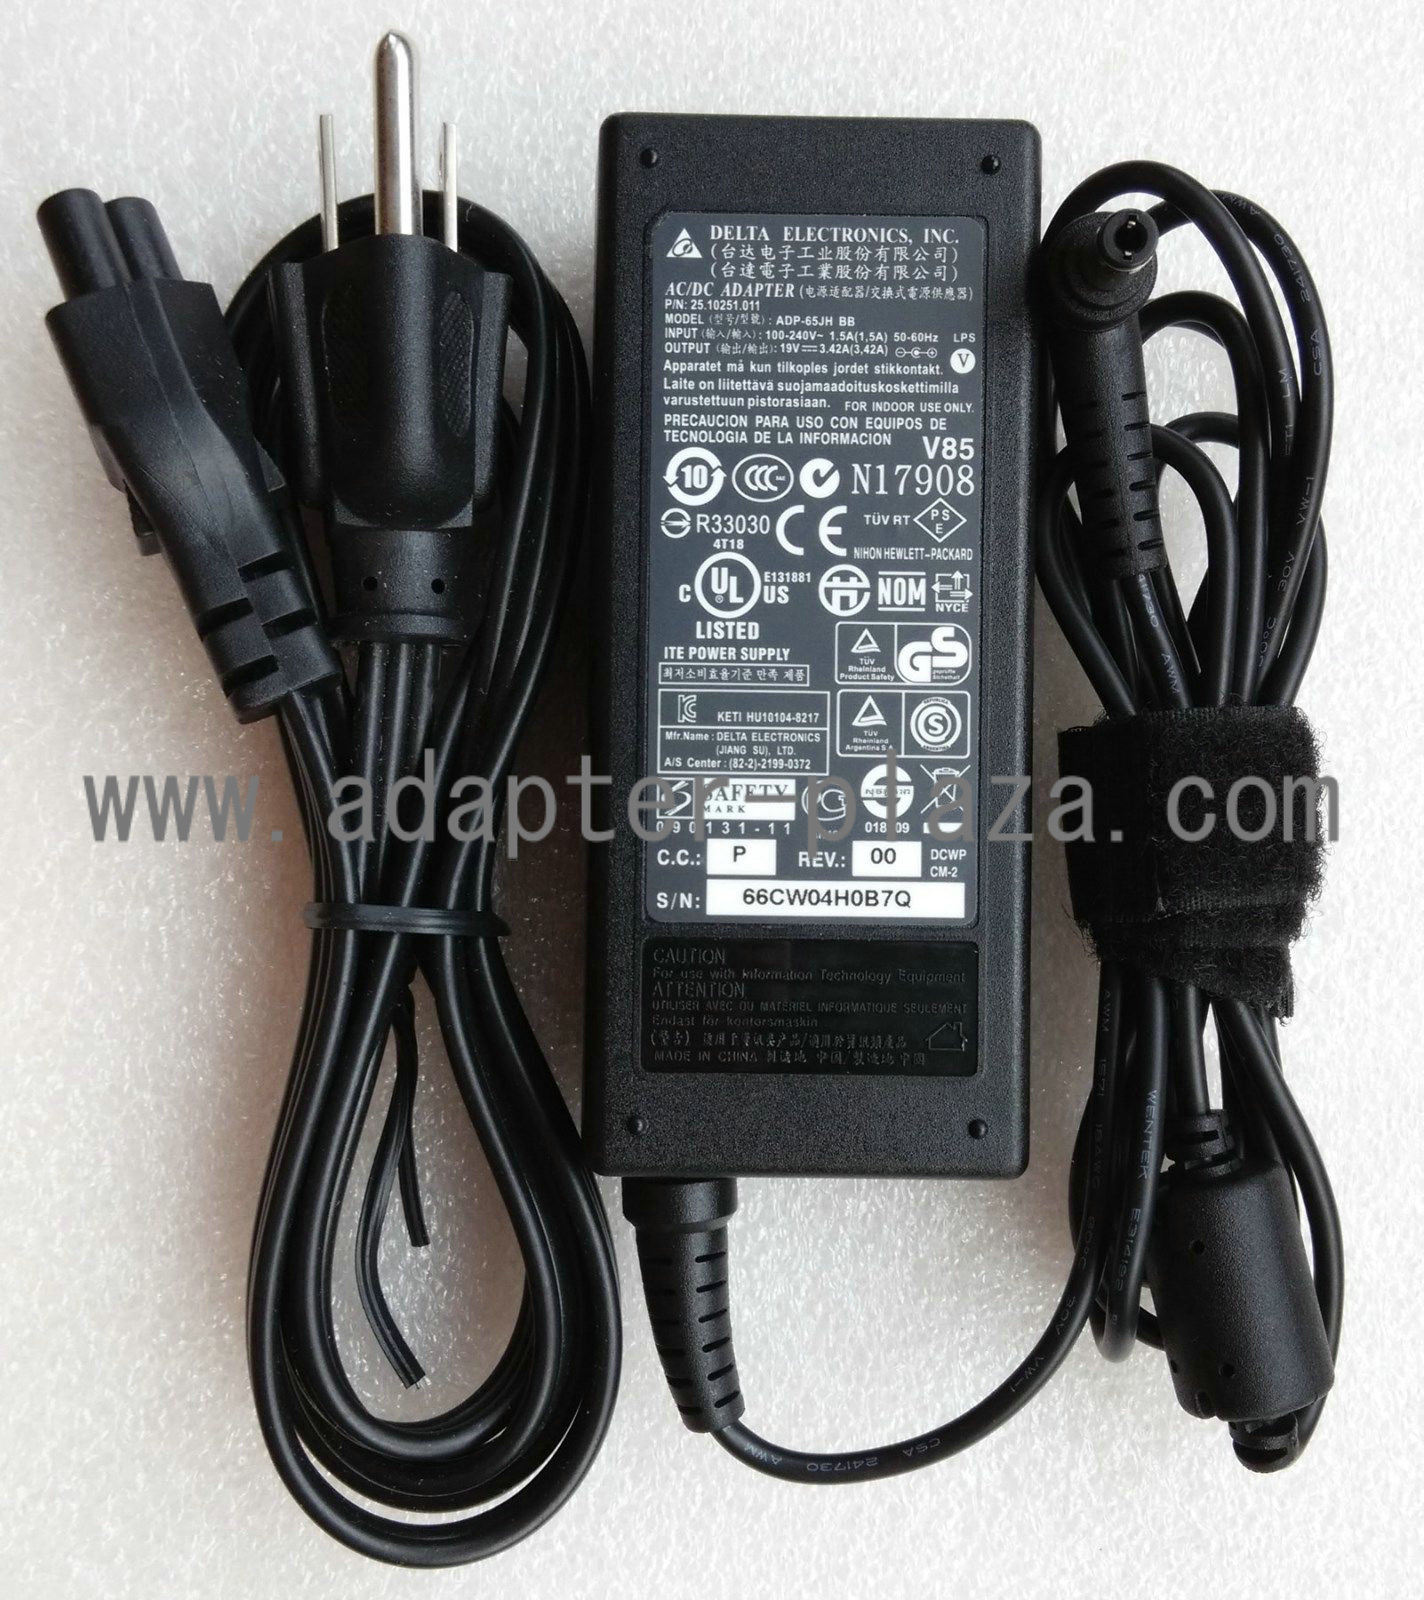 New Genuine Delta 65W 19V 3.42A ADP-65HB BB AC Adapter for Clevo W550SU1 Notebook